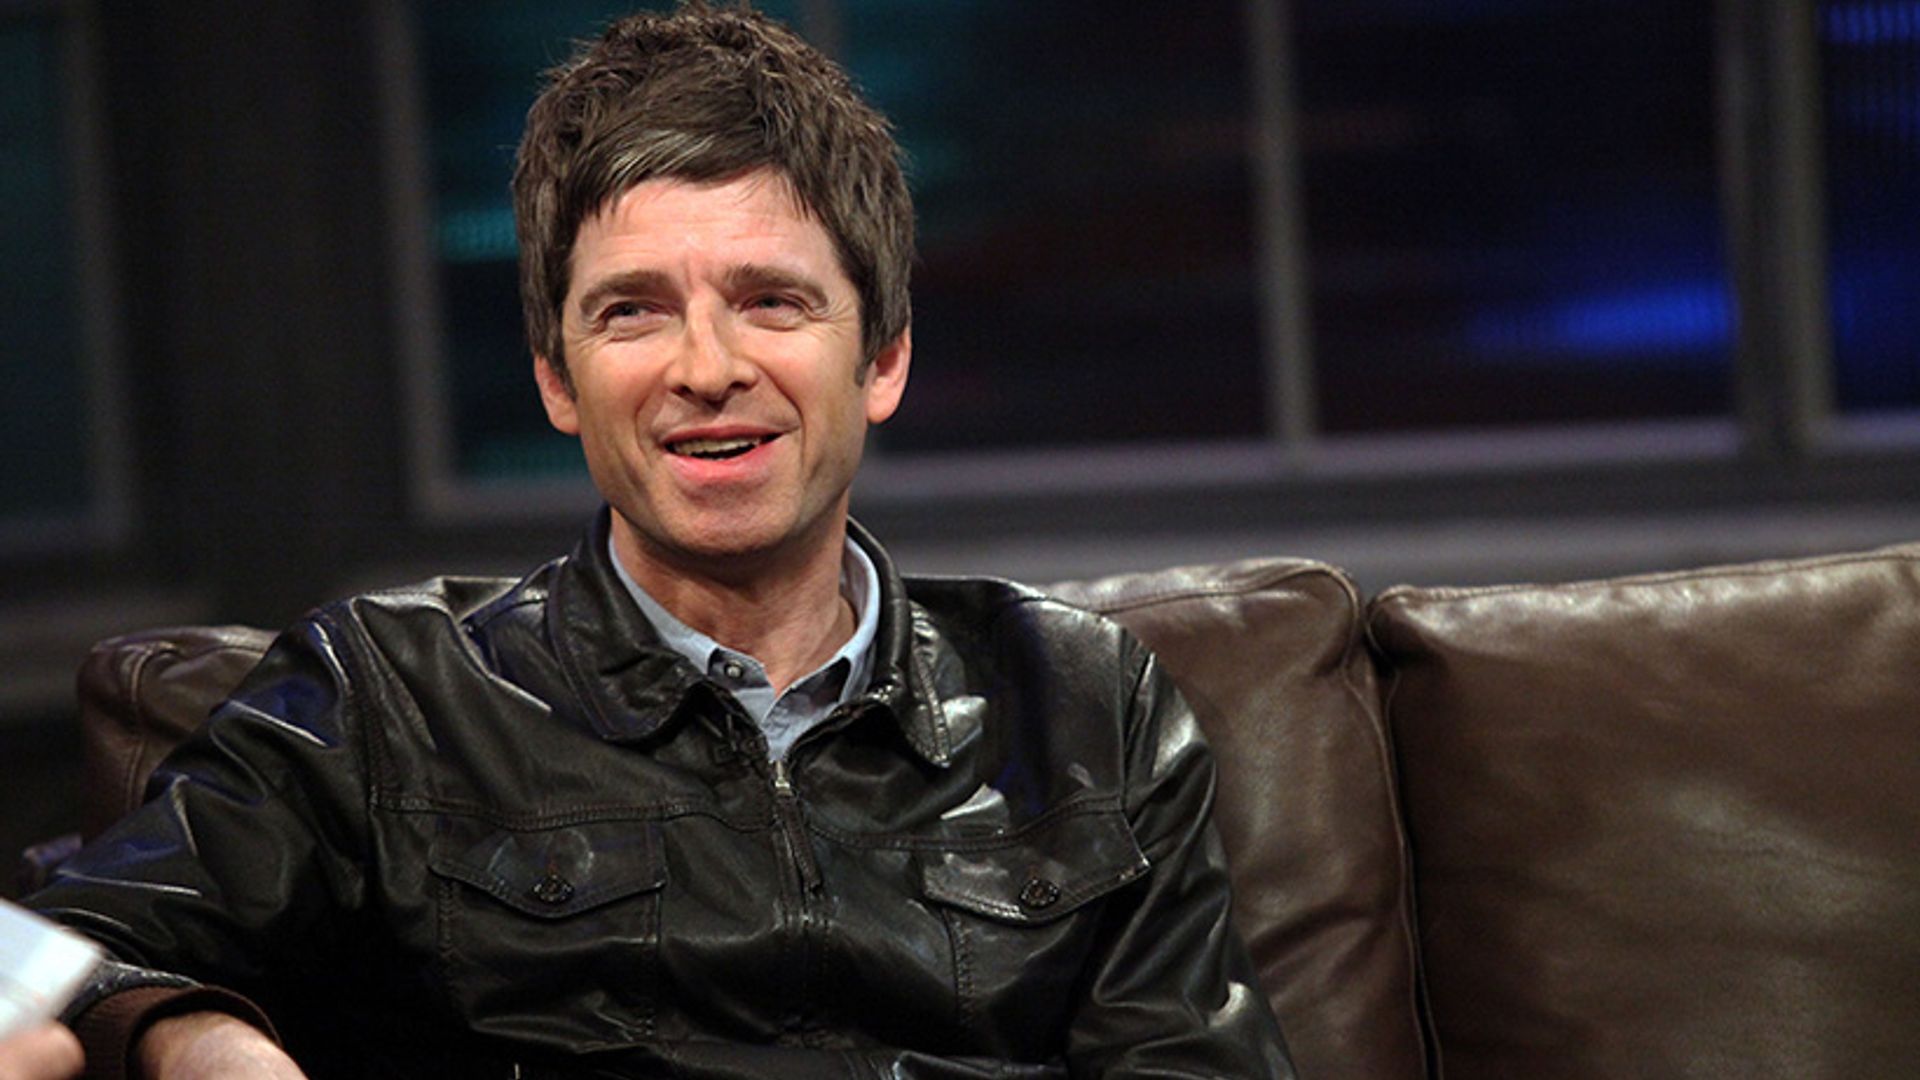 Noel Gallagher donates Don't Look Back in Anger royalties to help Manchester victims